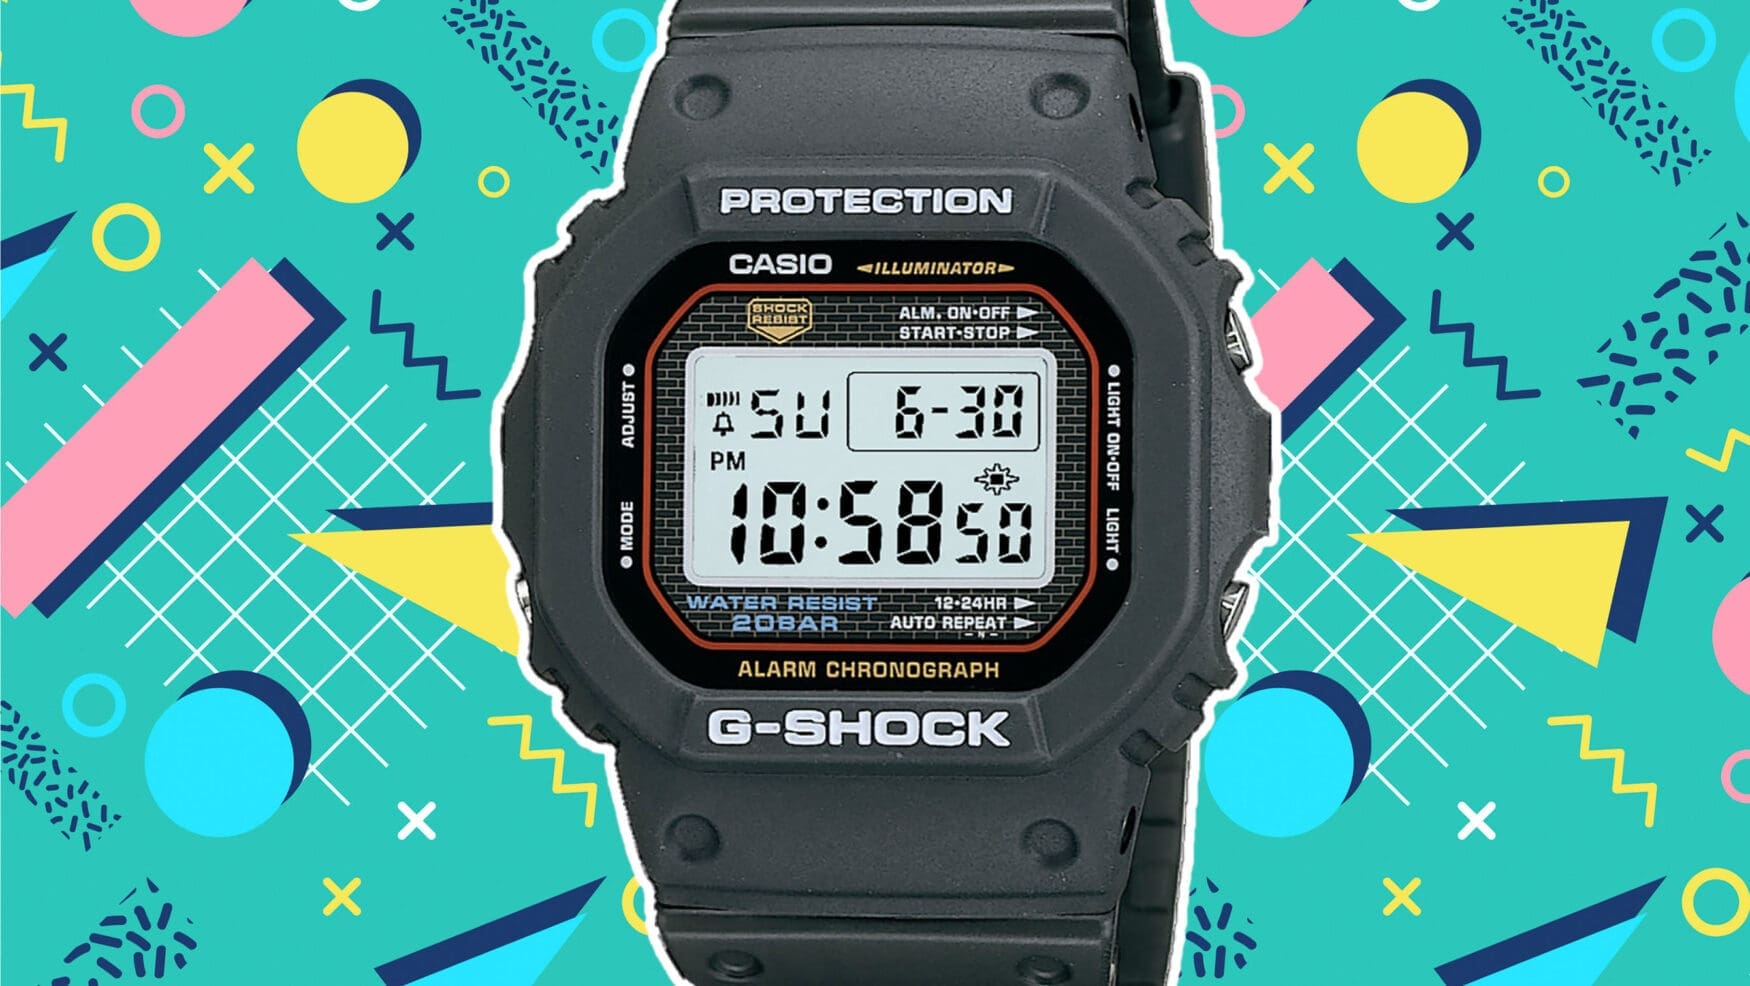 Timewarp treasures – 8 totally tubular watches from the 1980s